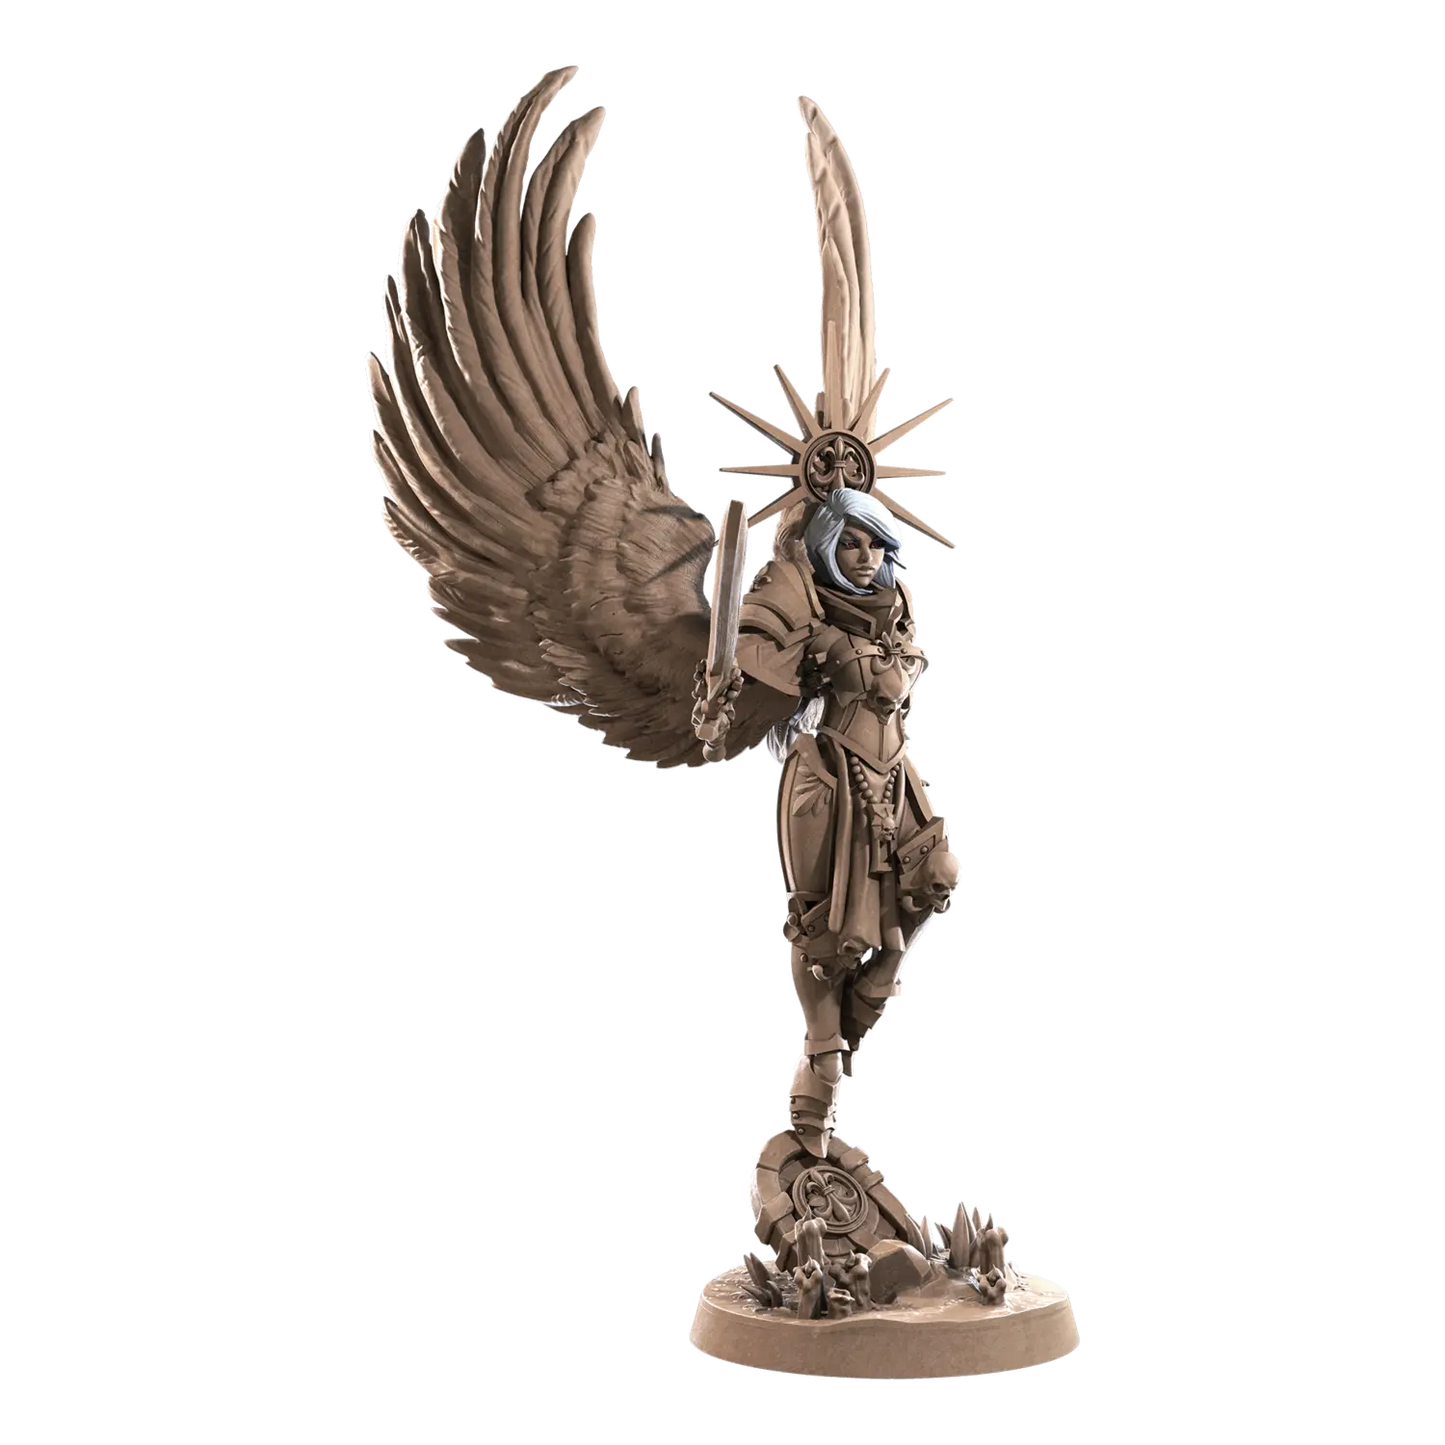 DnD Angel - Battle Sisters - Fighter - Human - Miniature - Paladin Evangeline 01 Angel - Battle Sisters - Fighter - Human - Miniature - Paladin sold by DoubleHitShop